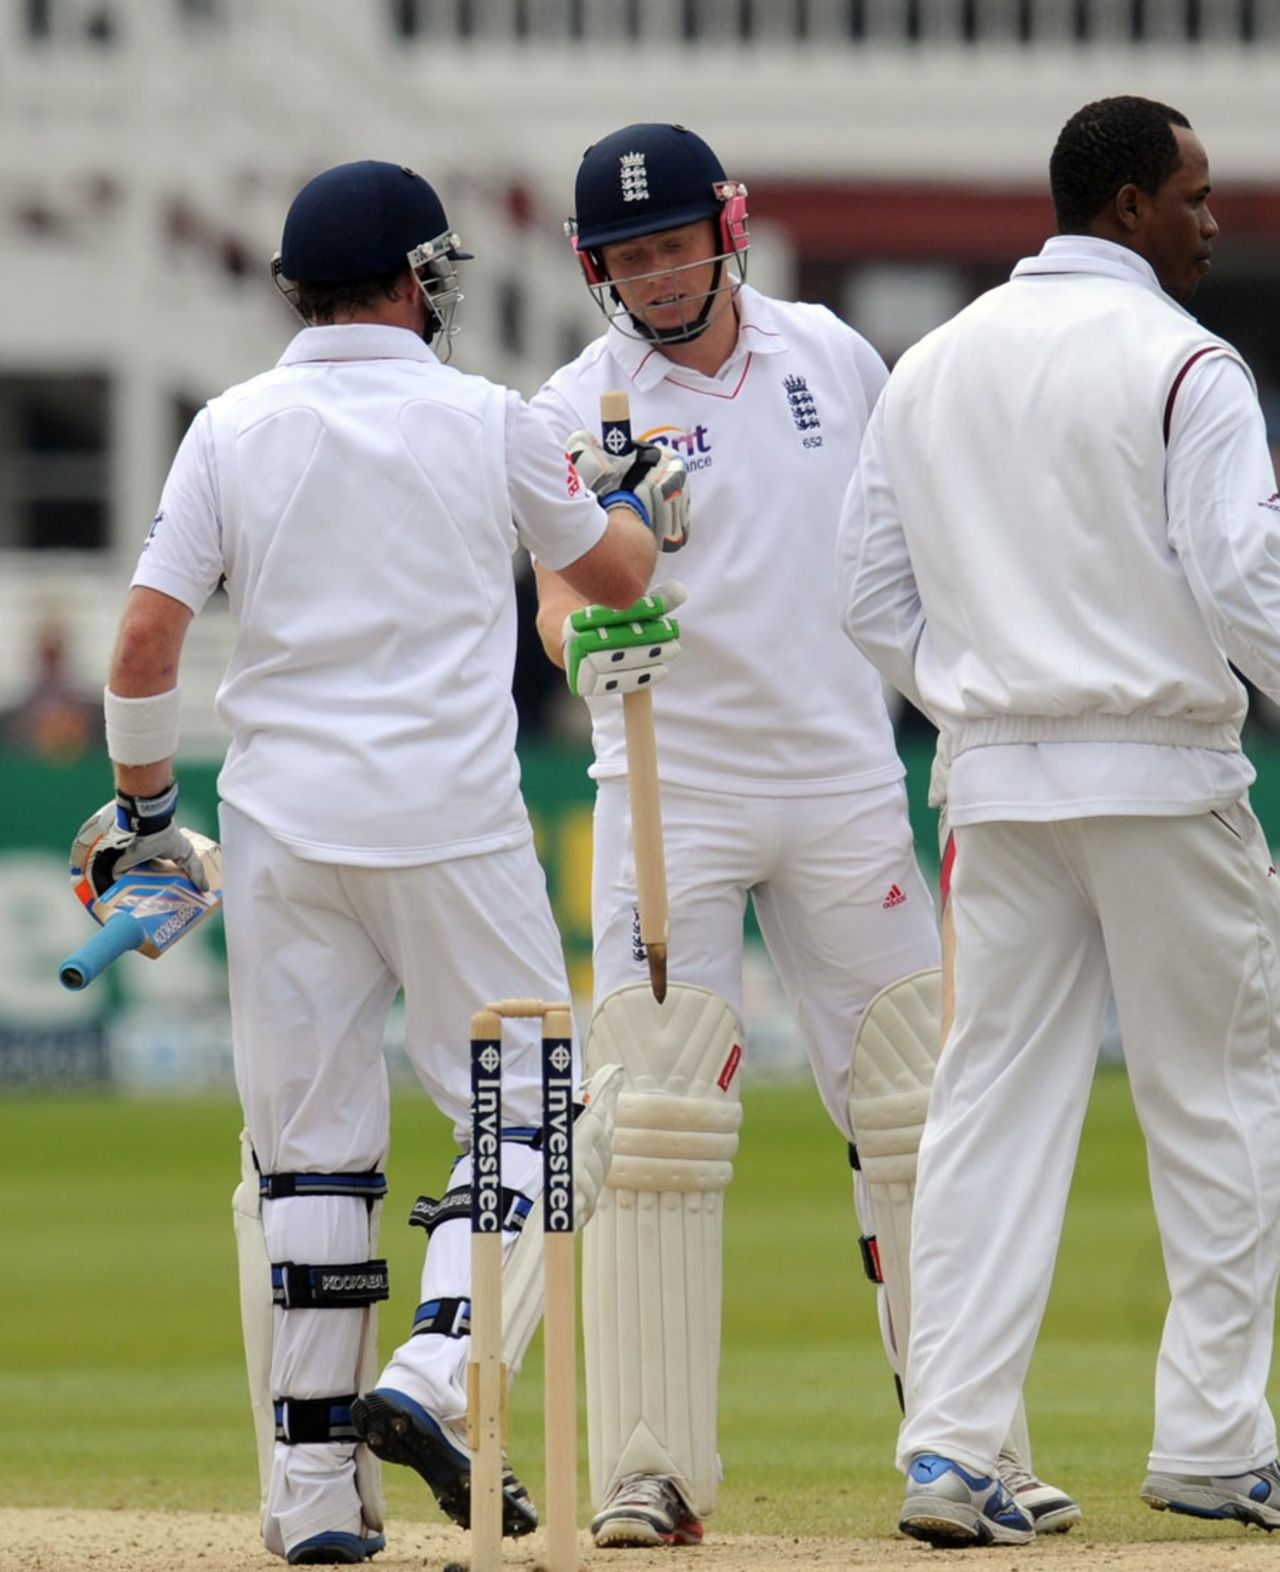 Ian Bell hands debutant Jonny Bairstow a stump in victory, England v West Indies, 1st Test, Lord's, 5th day, May 21, 2012